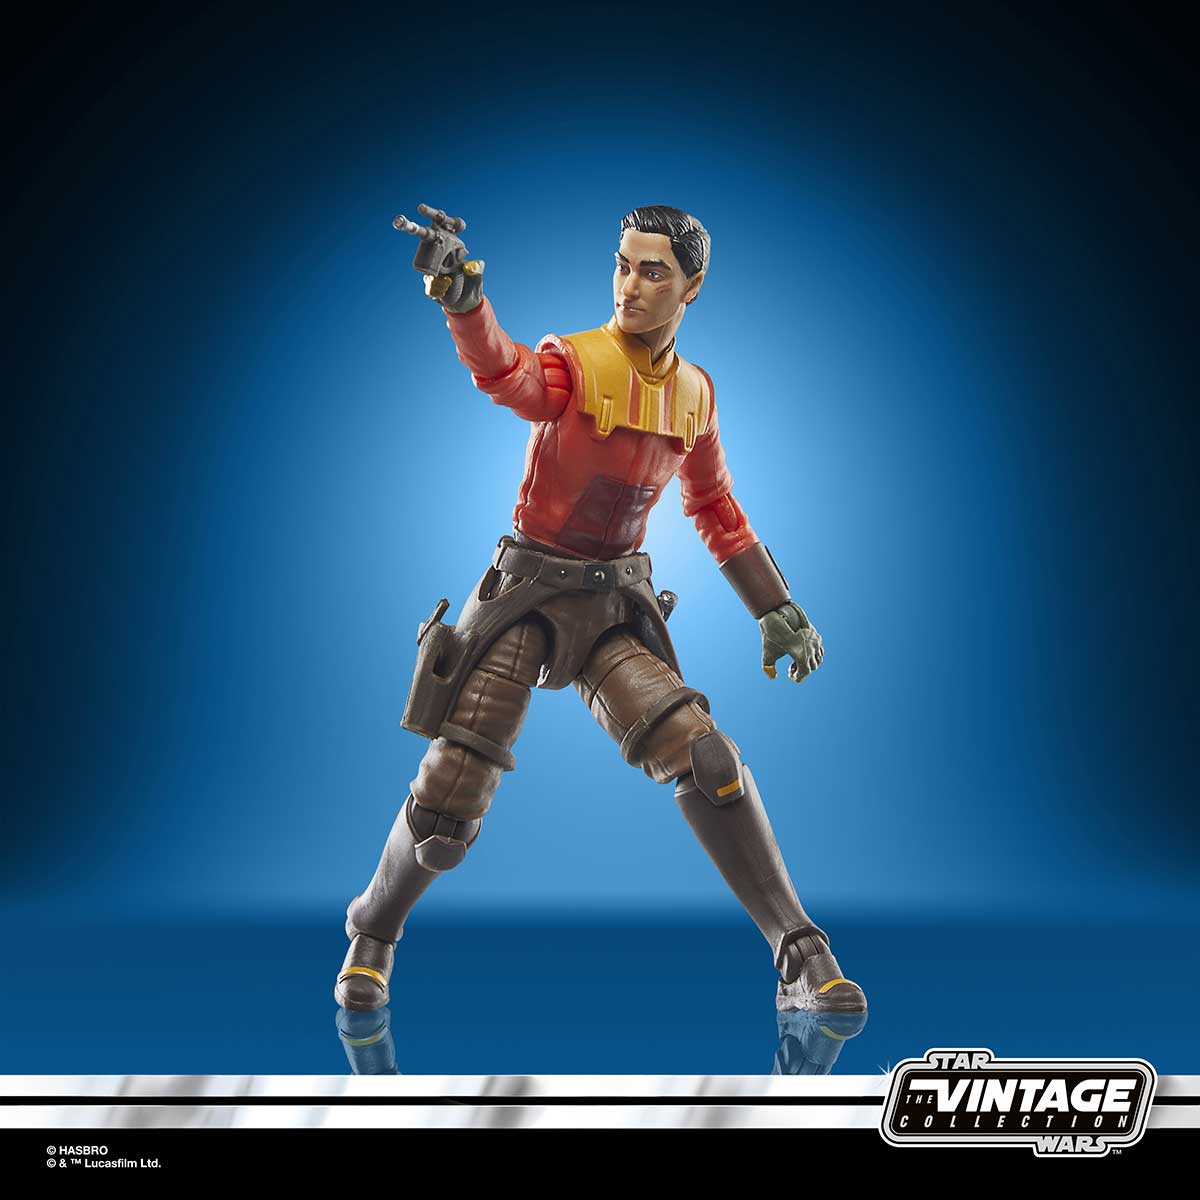 Star Wars Vintage Collection action figures grow with Star Wars: Rebels  line-up — Major Spoilers — Comic Book Reviews, News, Previews, and Podcasts